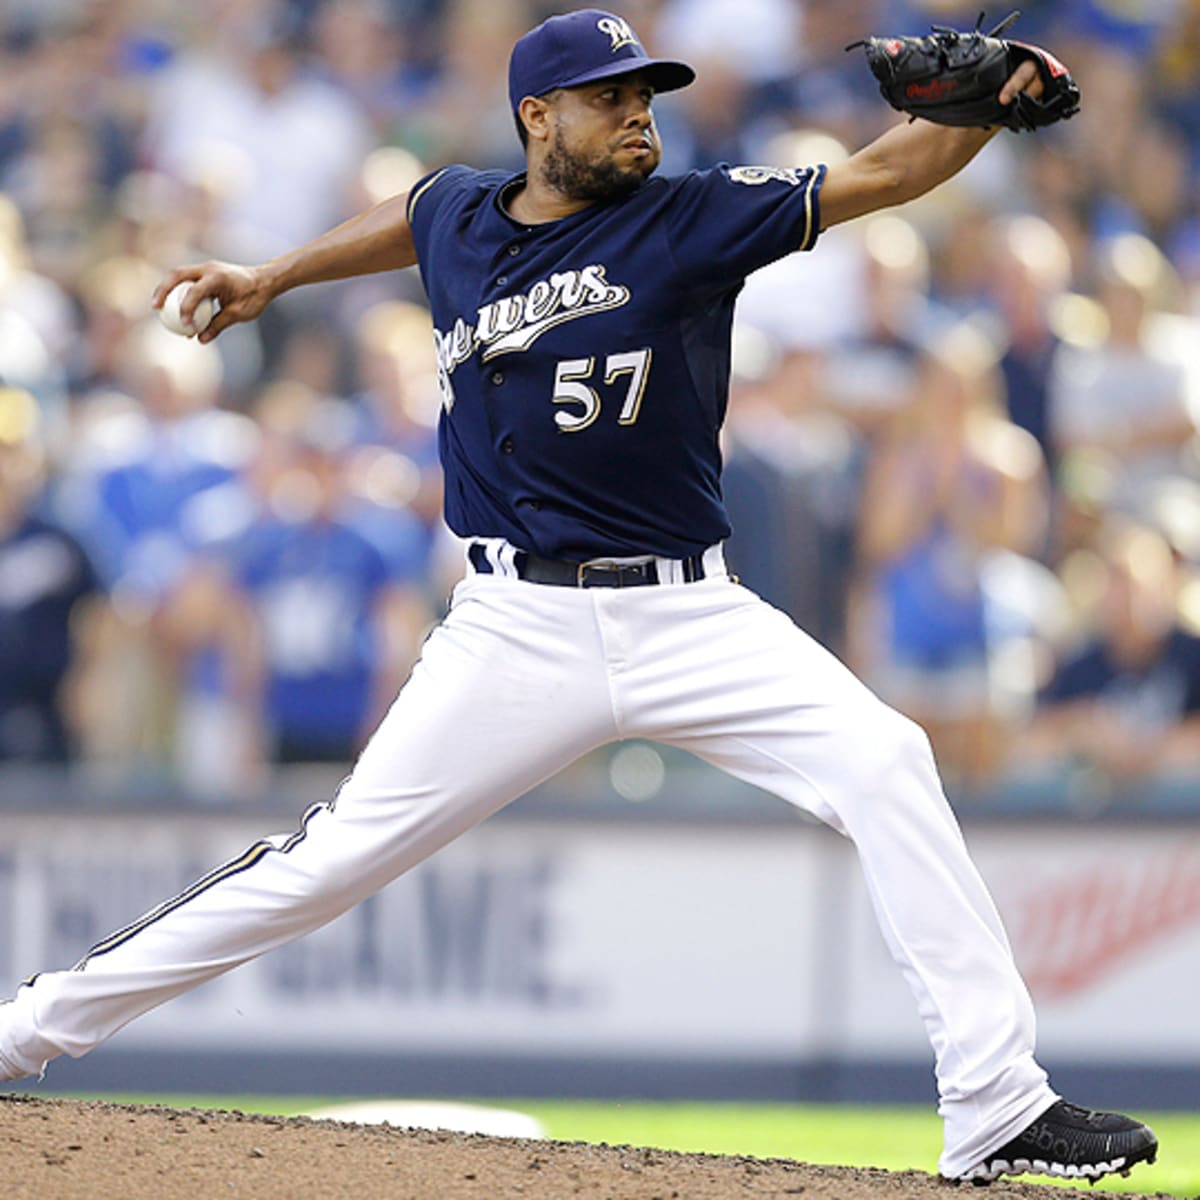 Mets Trade Closer Francisco Rodriguez to the Brewers - The New York Times